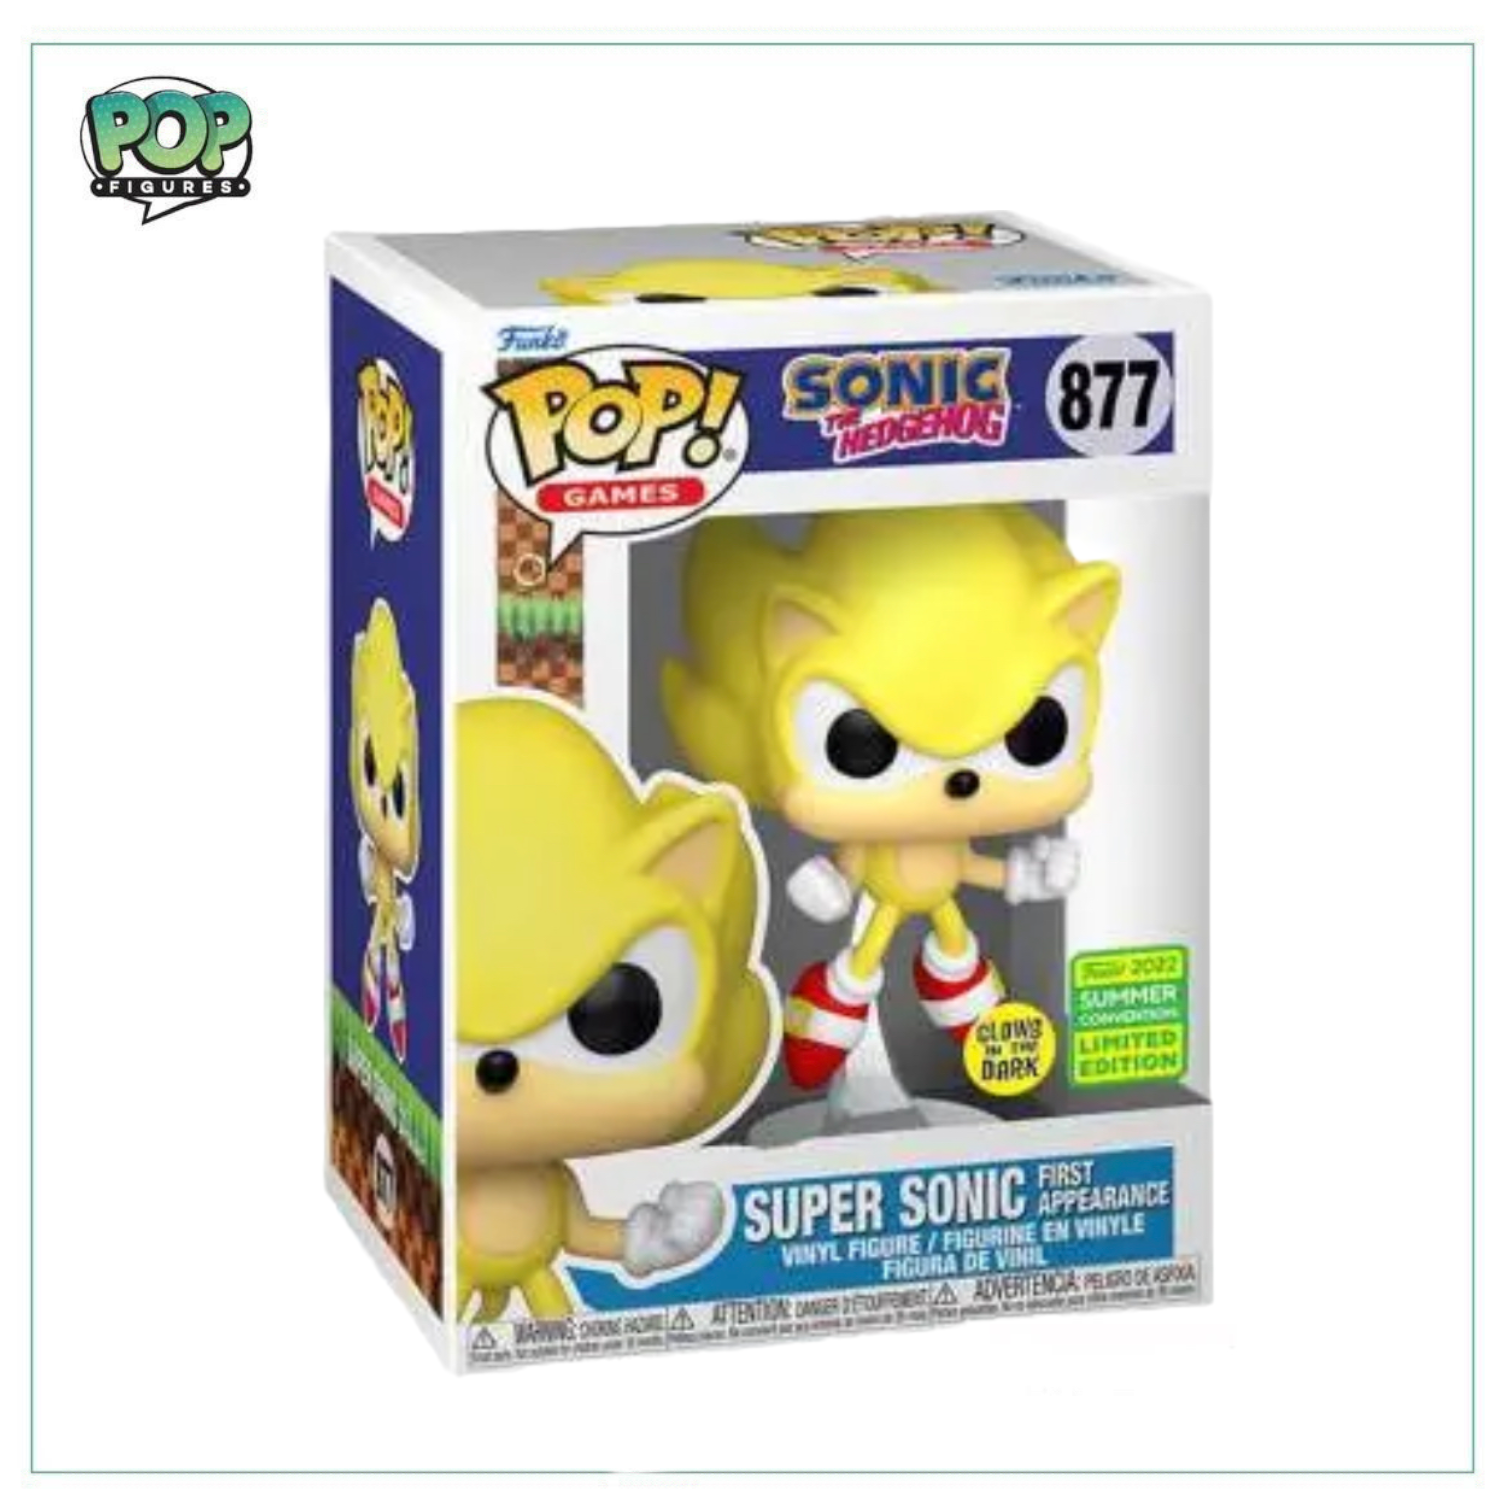 Super Sonic First Appearance (Glows In The Dark) #877 Funko Pop! Sonic The Hedgehog - 2022 SDCC Shared Exclusive - Angry Cat